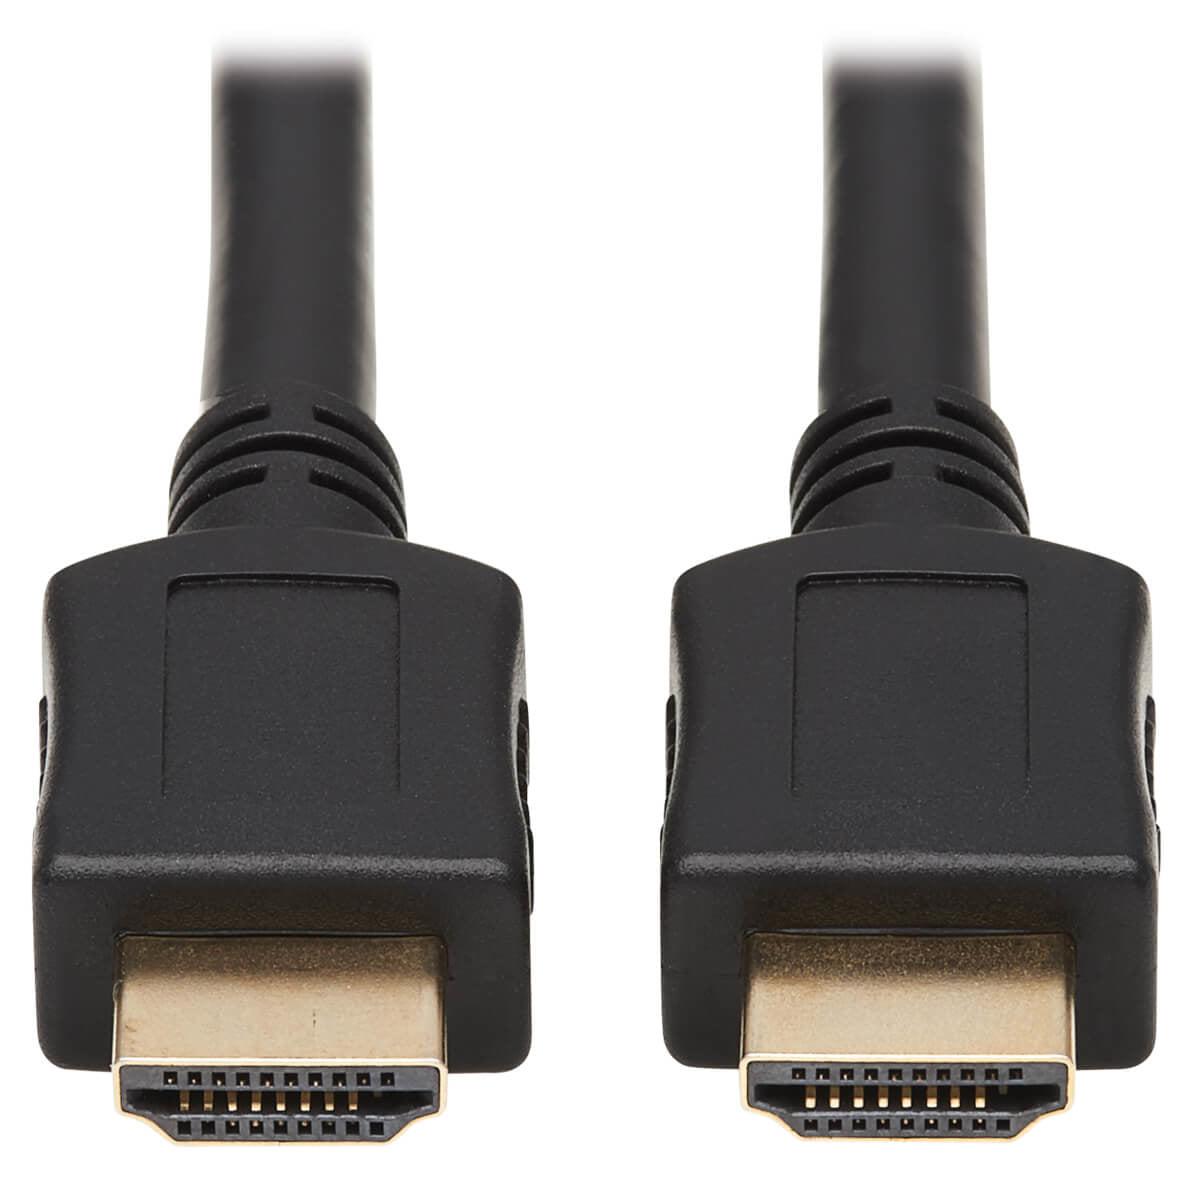 Tripp Lite P569-025-Cl2 High-Speed Hdmi Cable With Ethernet (M/M), Uhd 4K, 4:4:4, Cl2 Rated, Black, 25 Ft.